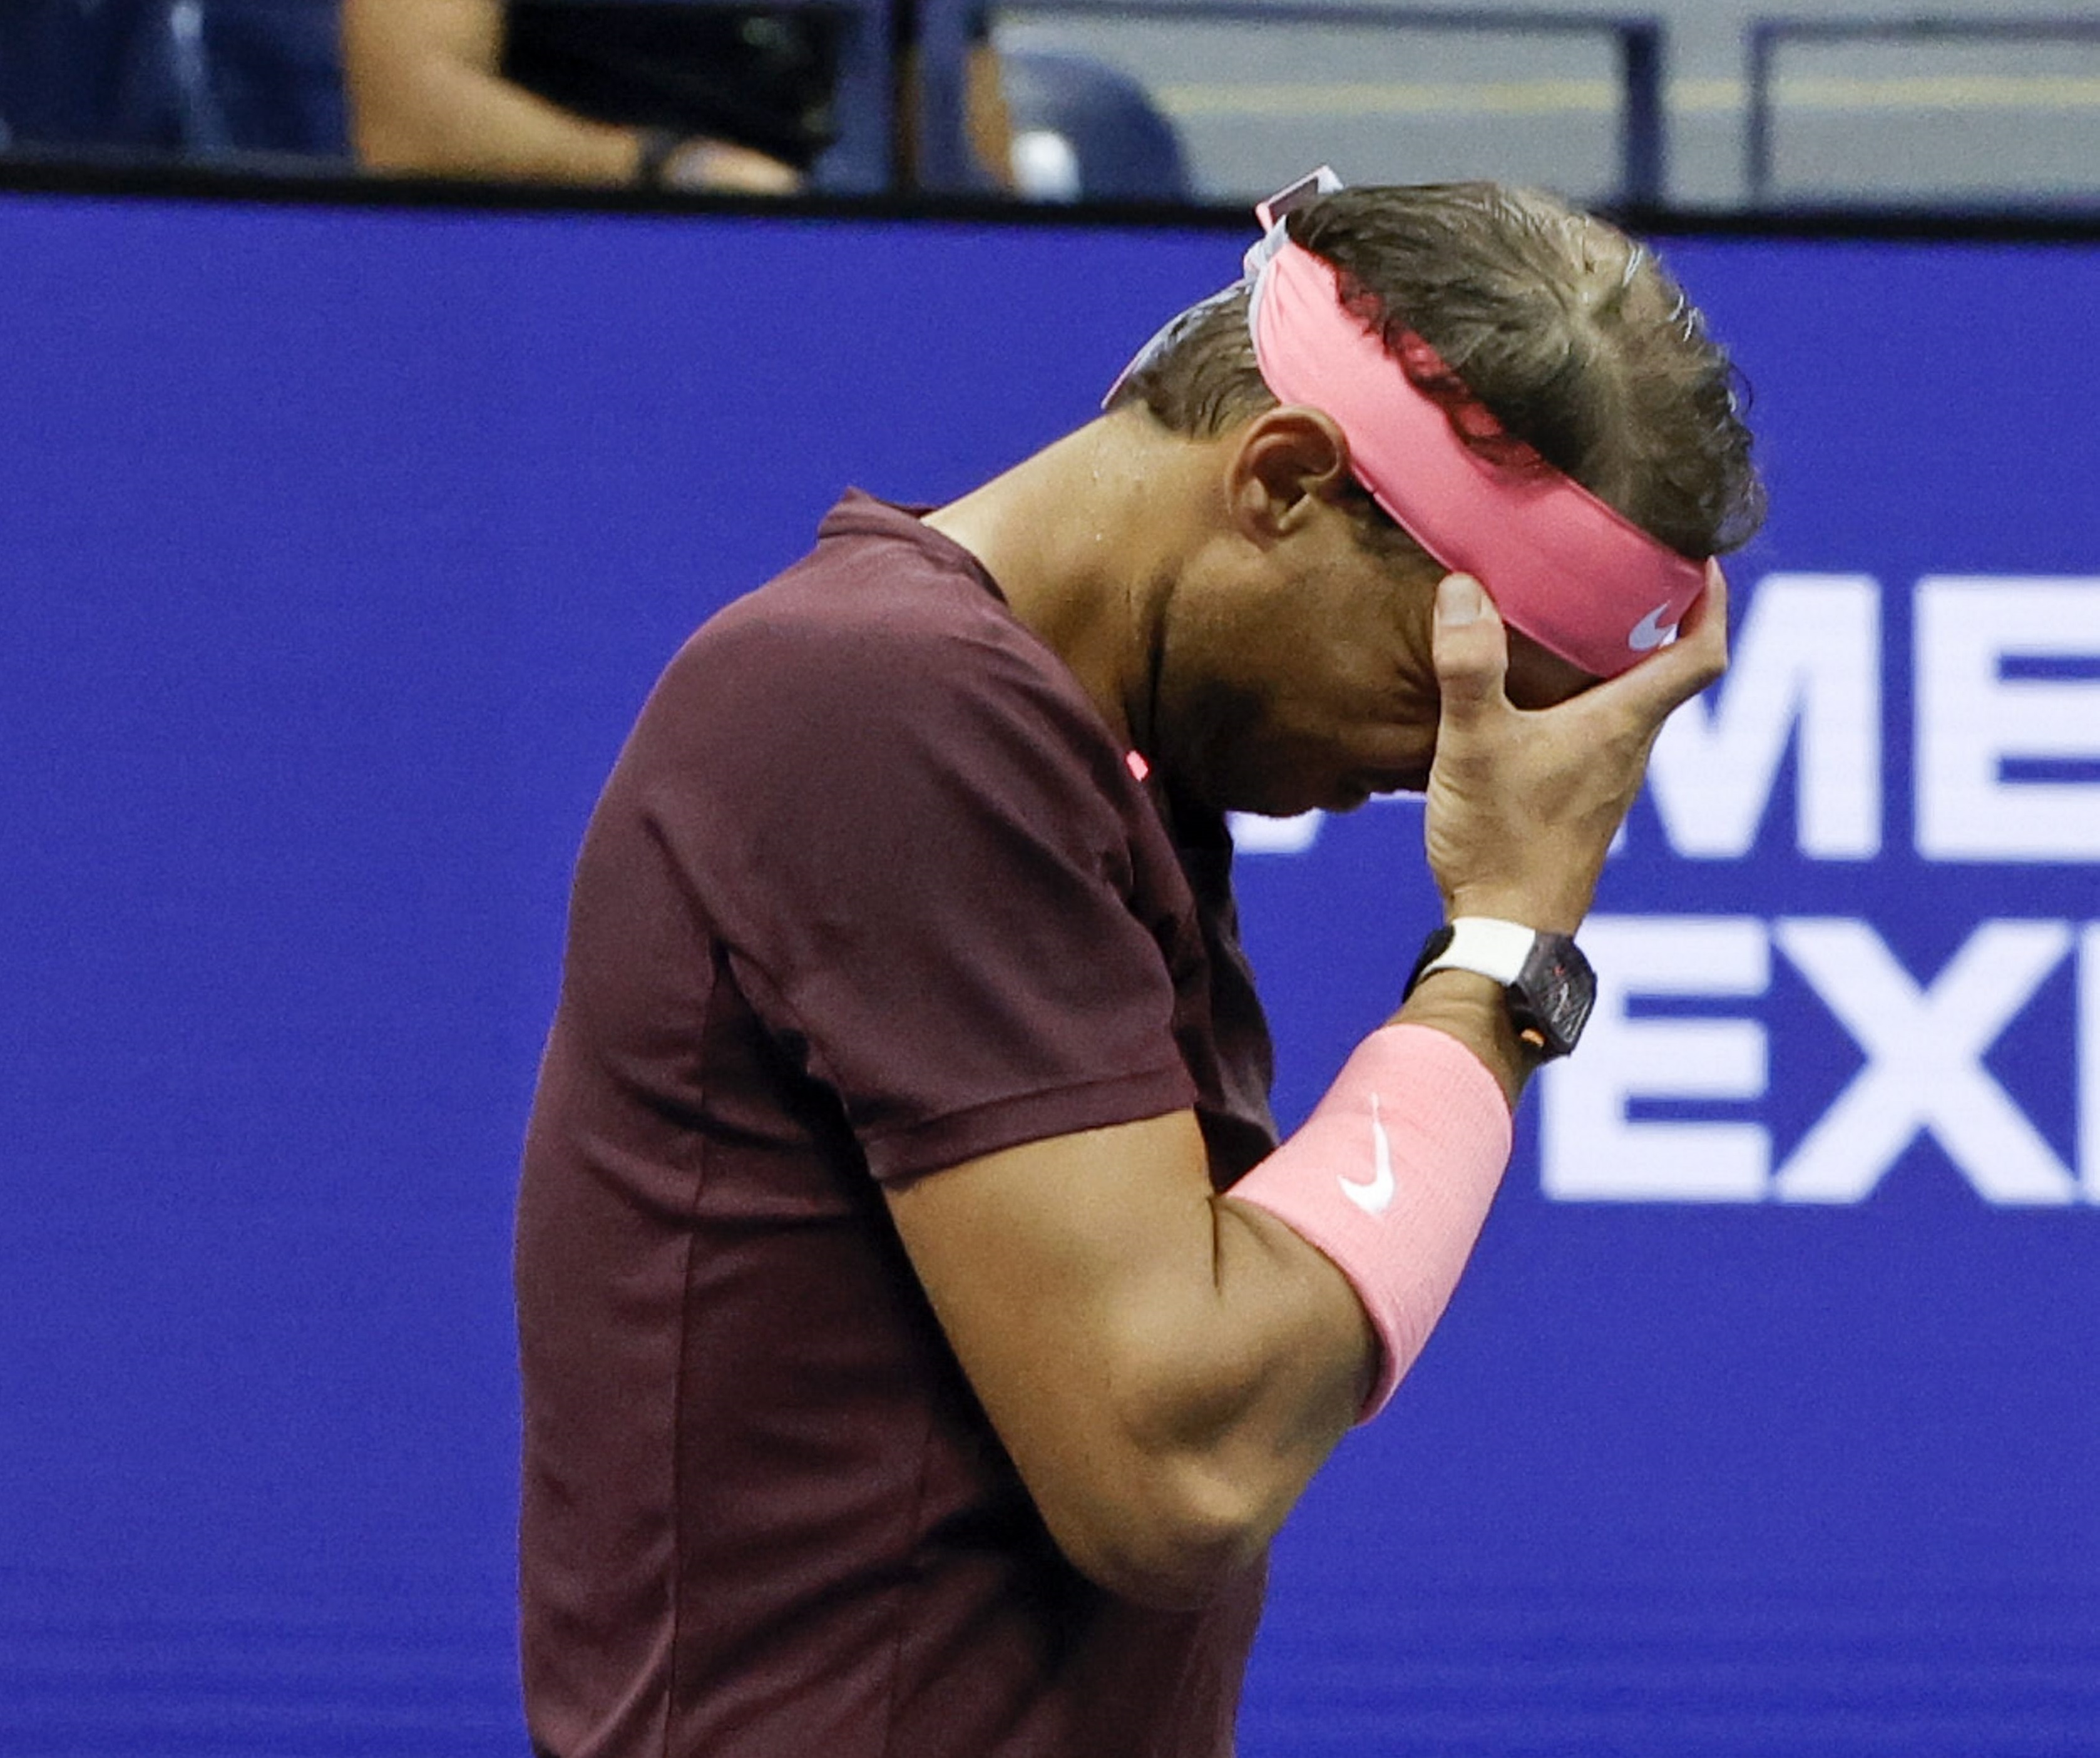 Nadal, during the match against Fognini in the second round of the US Open.